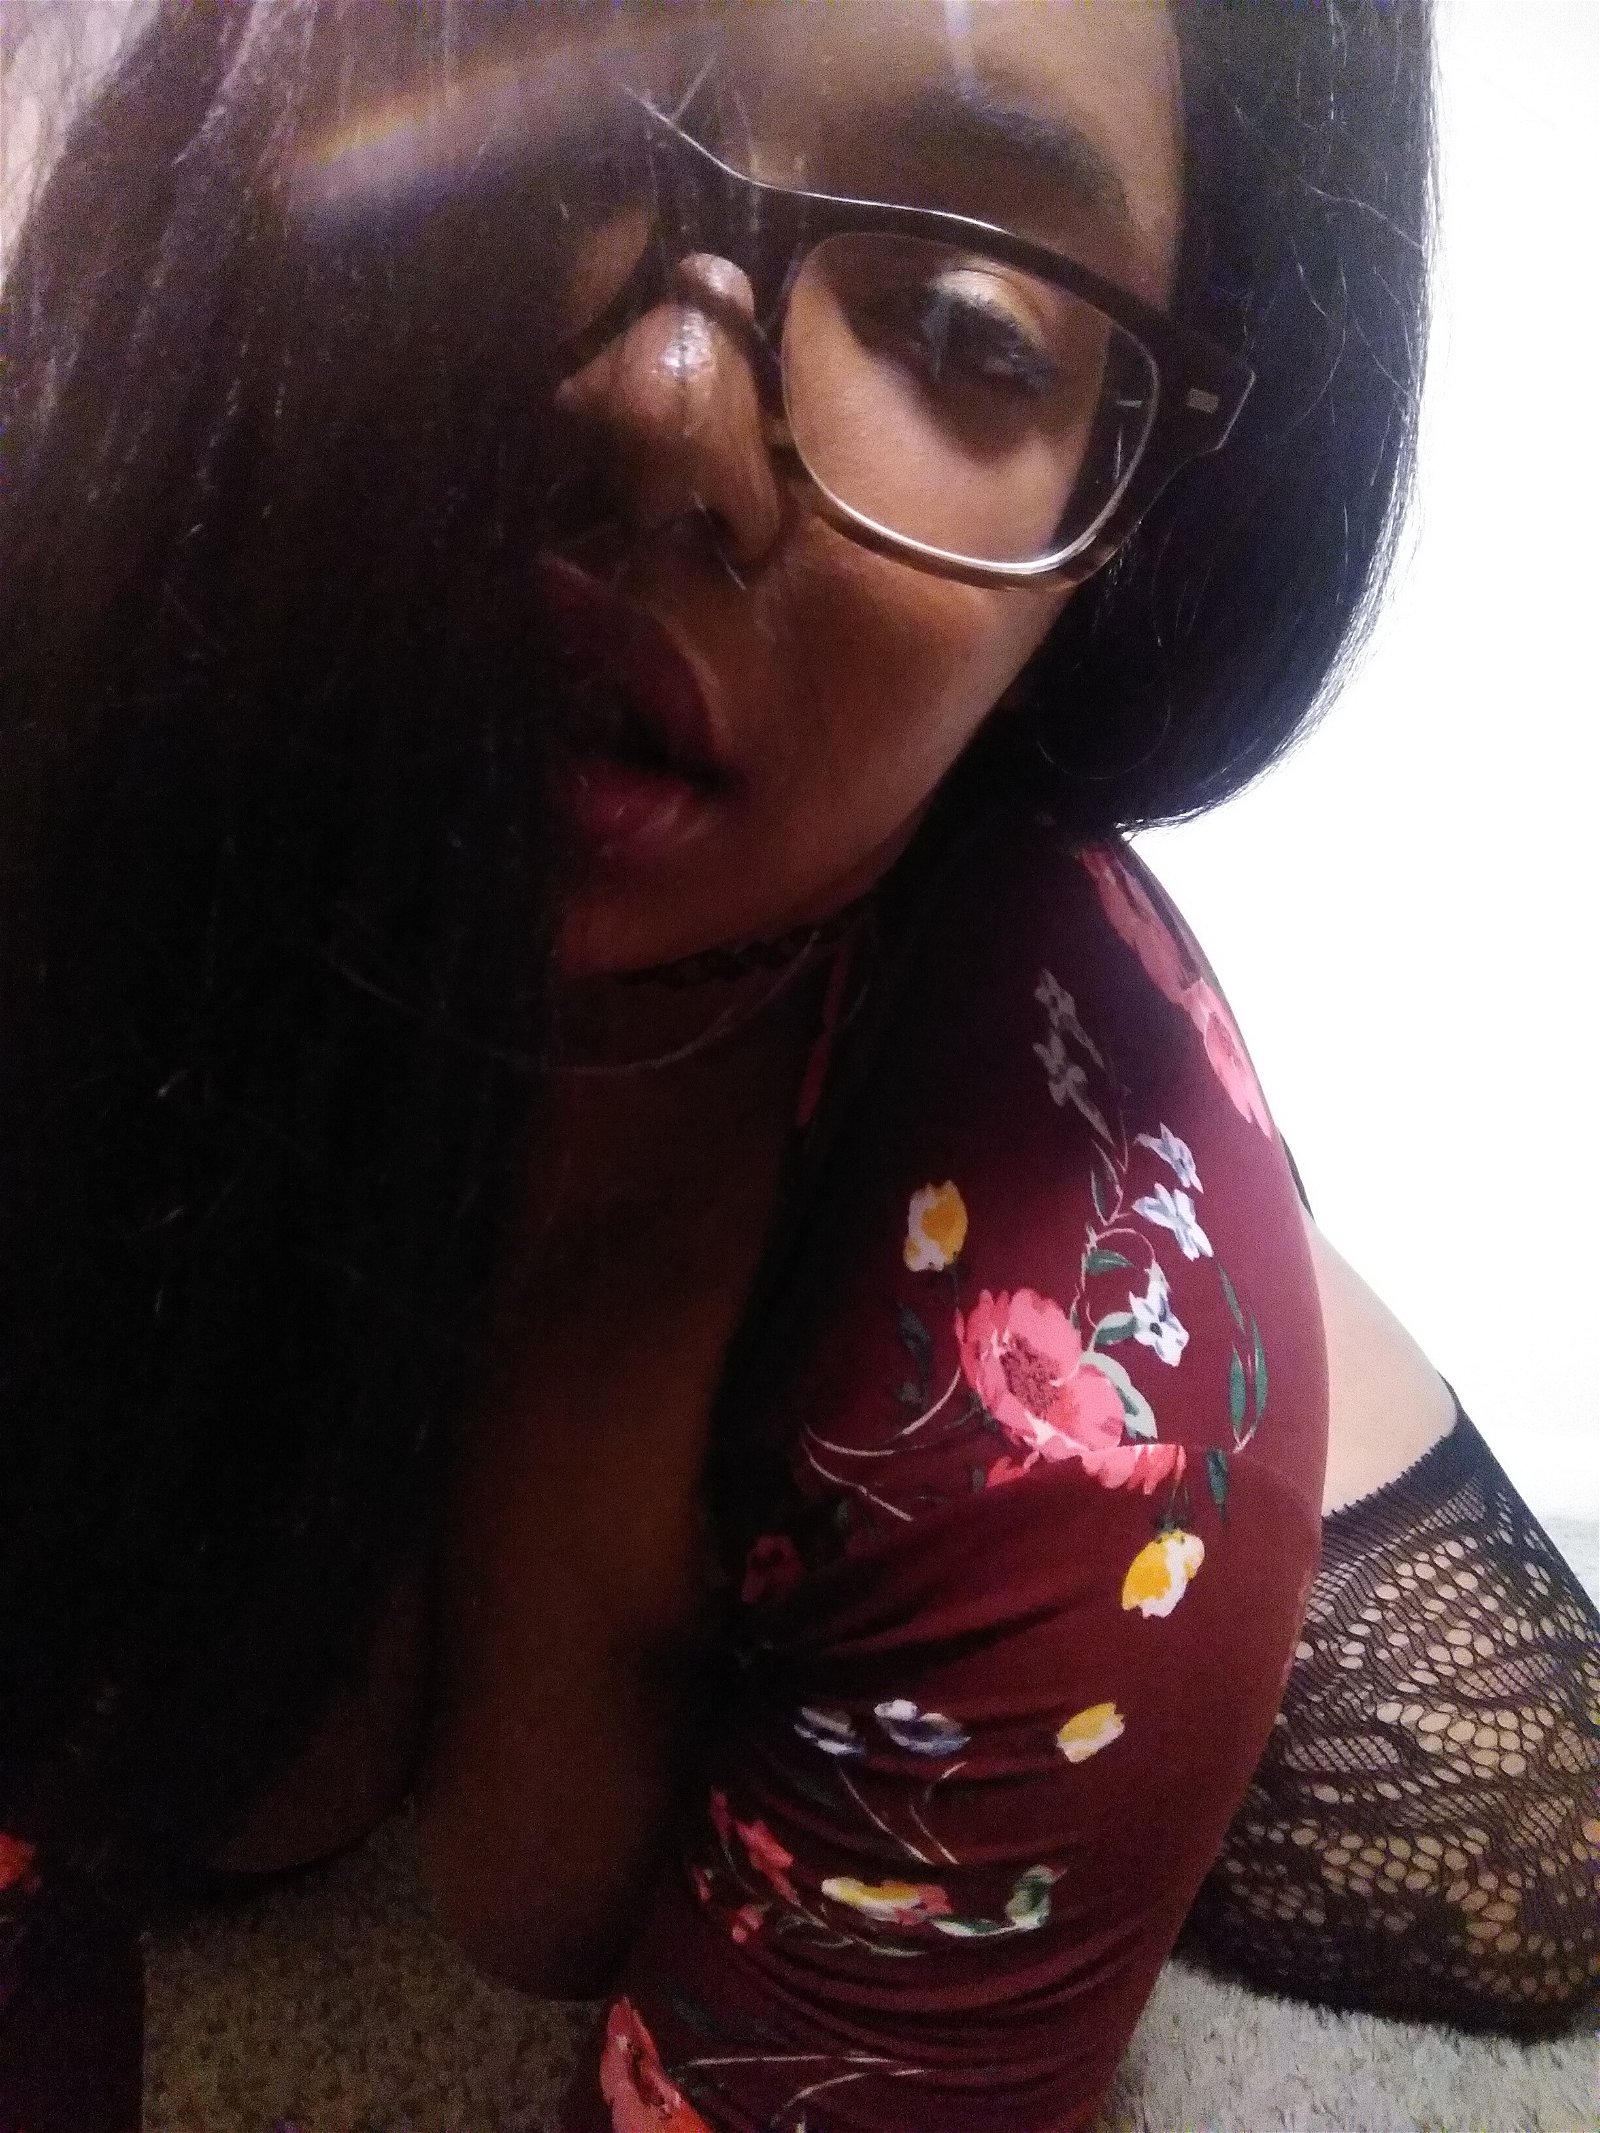 Photo by KultGoddess with the username @KultGoddess,  April 24, 2019 at 5:29 PM. The post is about the topic Kendal's Texts and the text says 'To be among such horny and willing kinksters like you...

It makes my little Goddess heart so happy, and my pussy so, so wet. I'm glad to be here~'